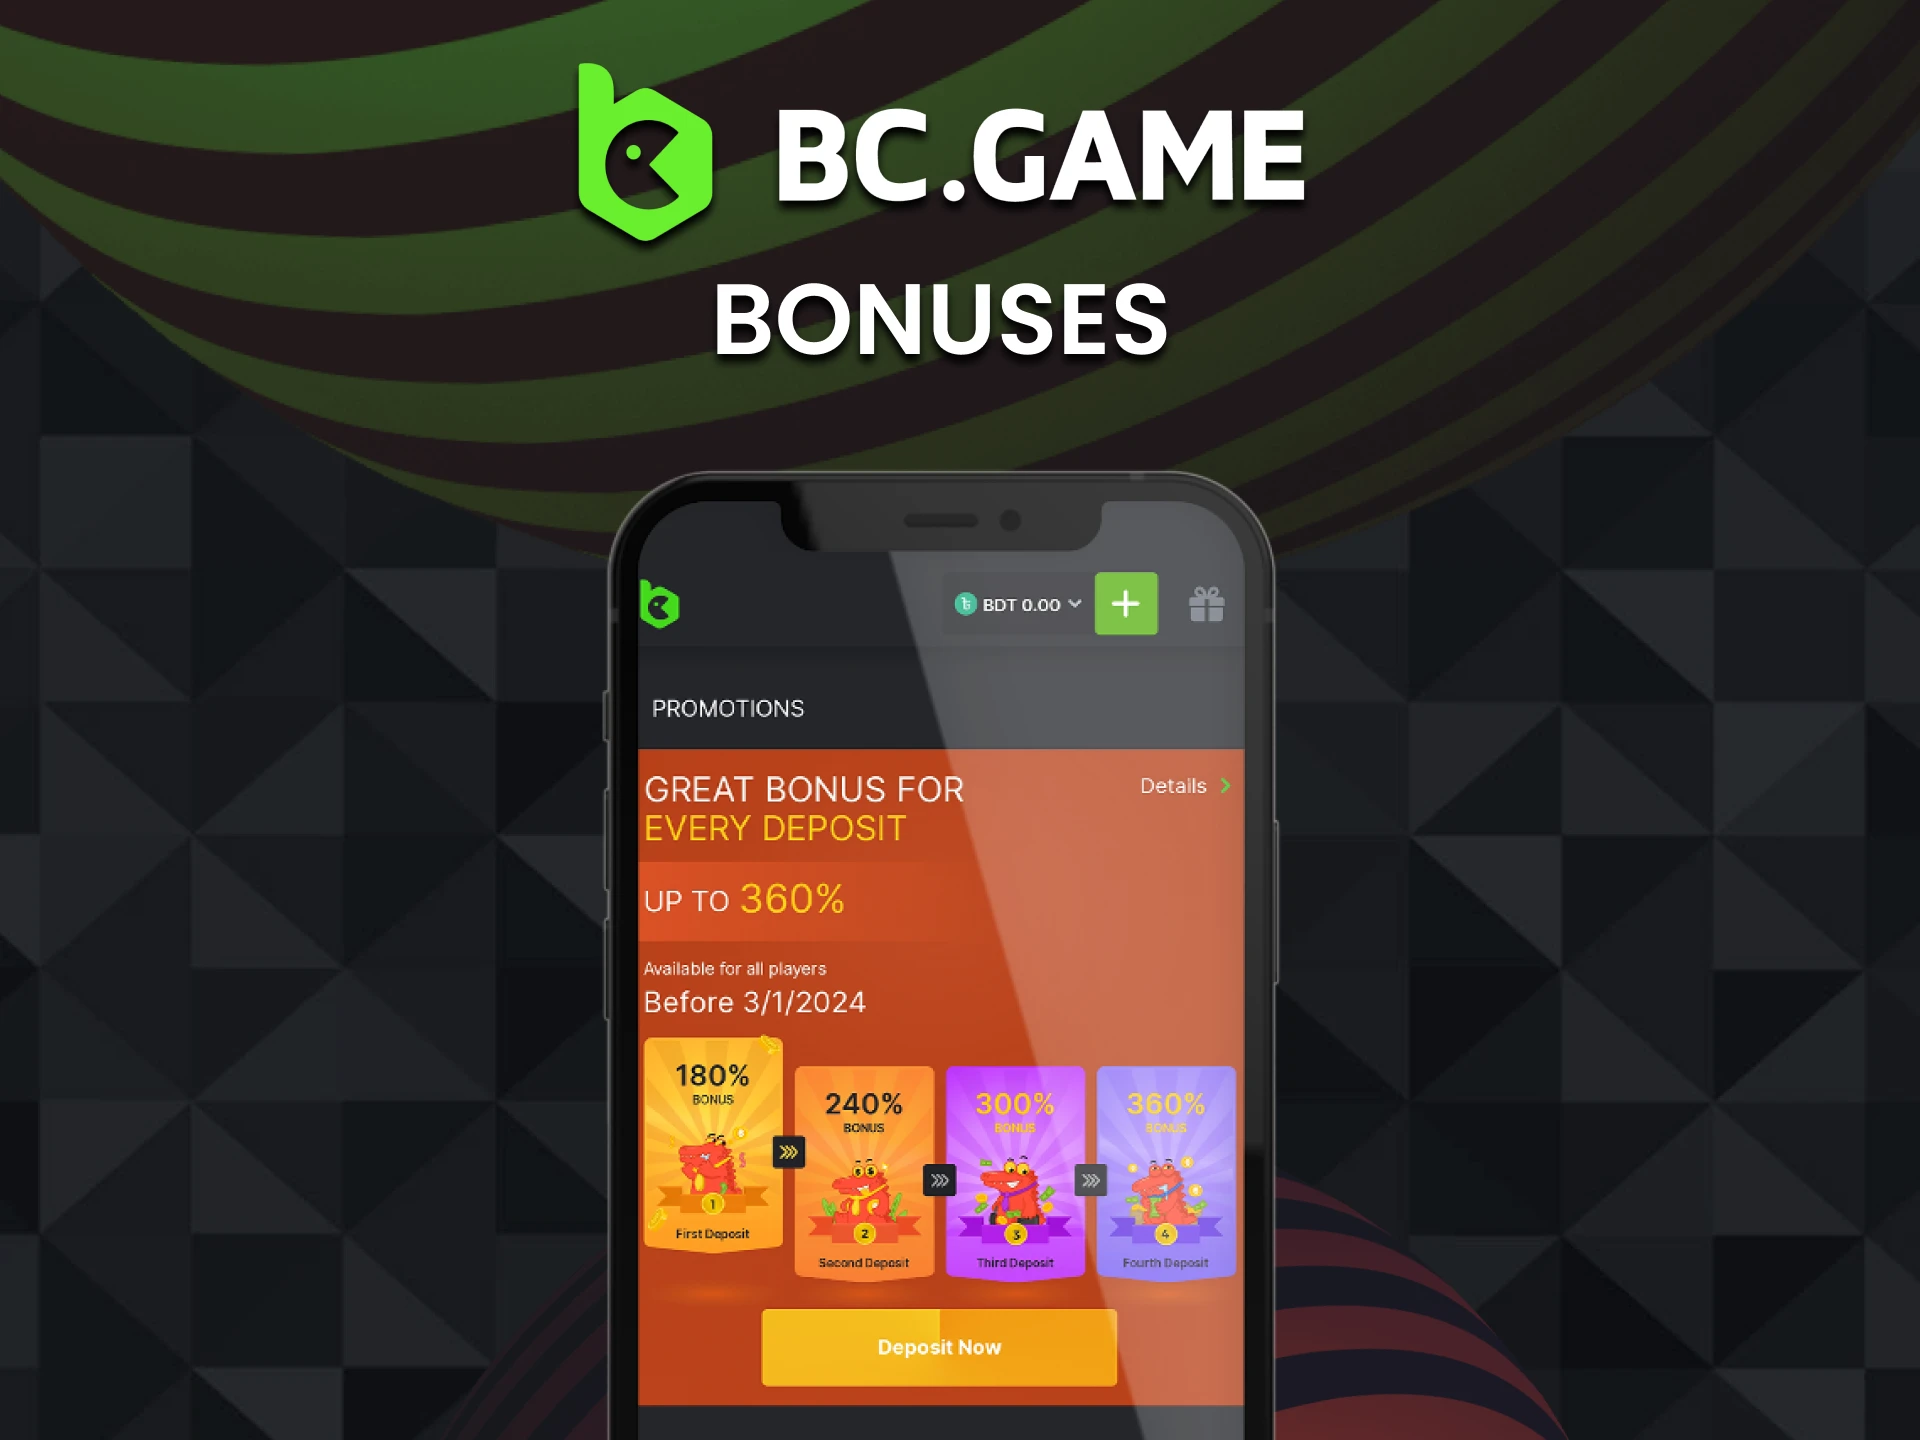 Get a welcome bonus of up to 2,115,000 BDT in the BC Game app.